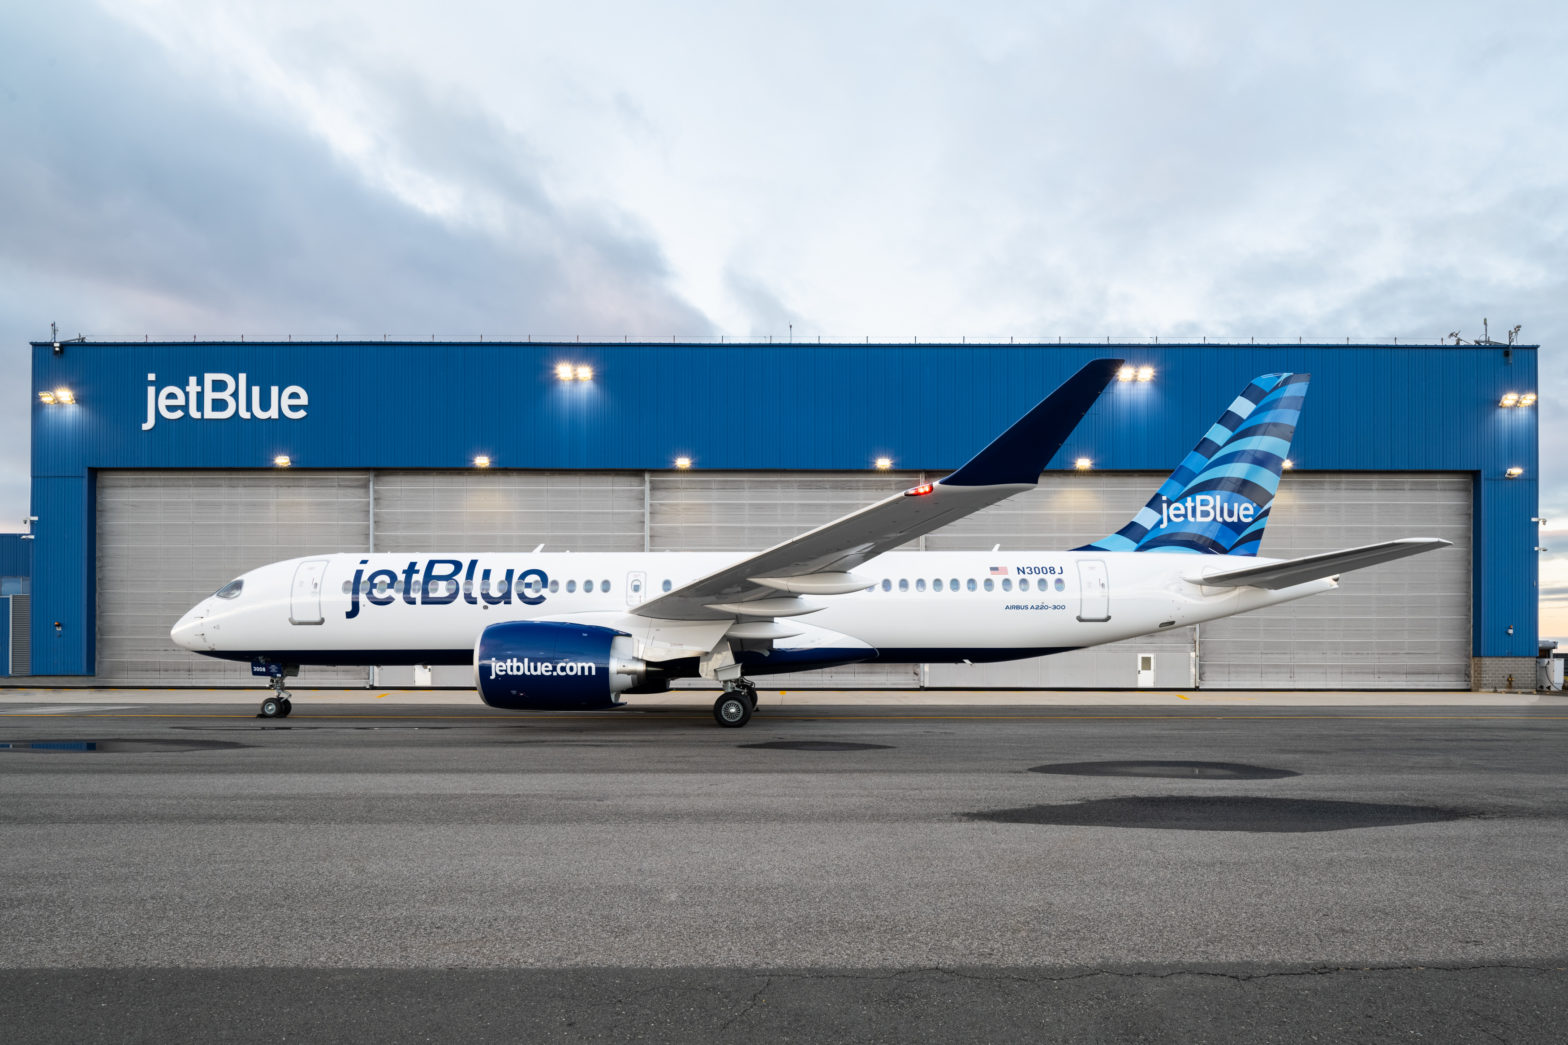 IAM Files For Union Representation Election For Approximately 3,000 JetBlue Ground Workers